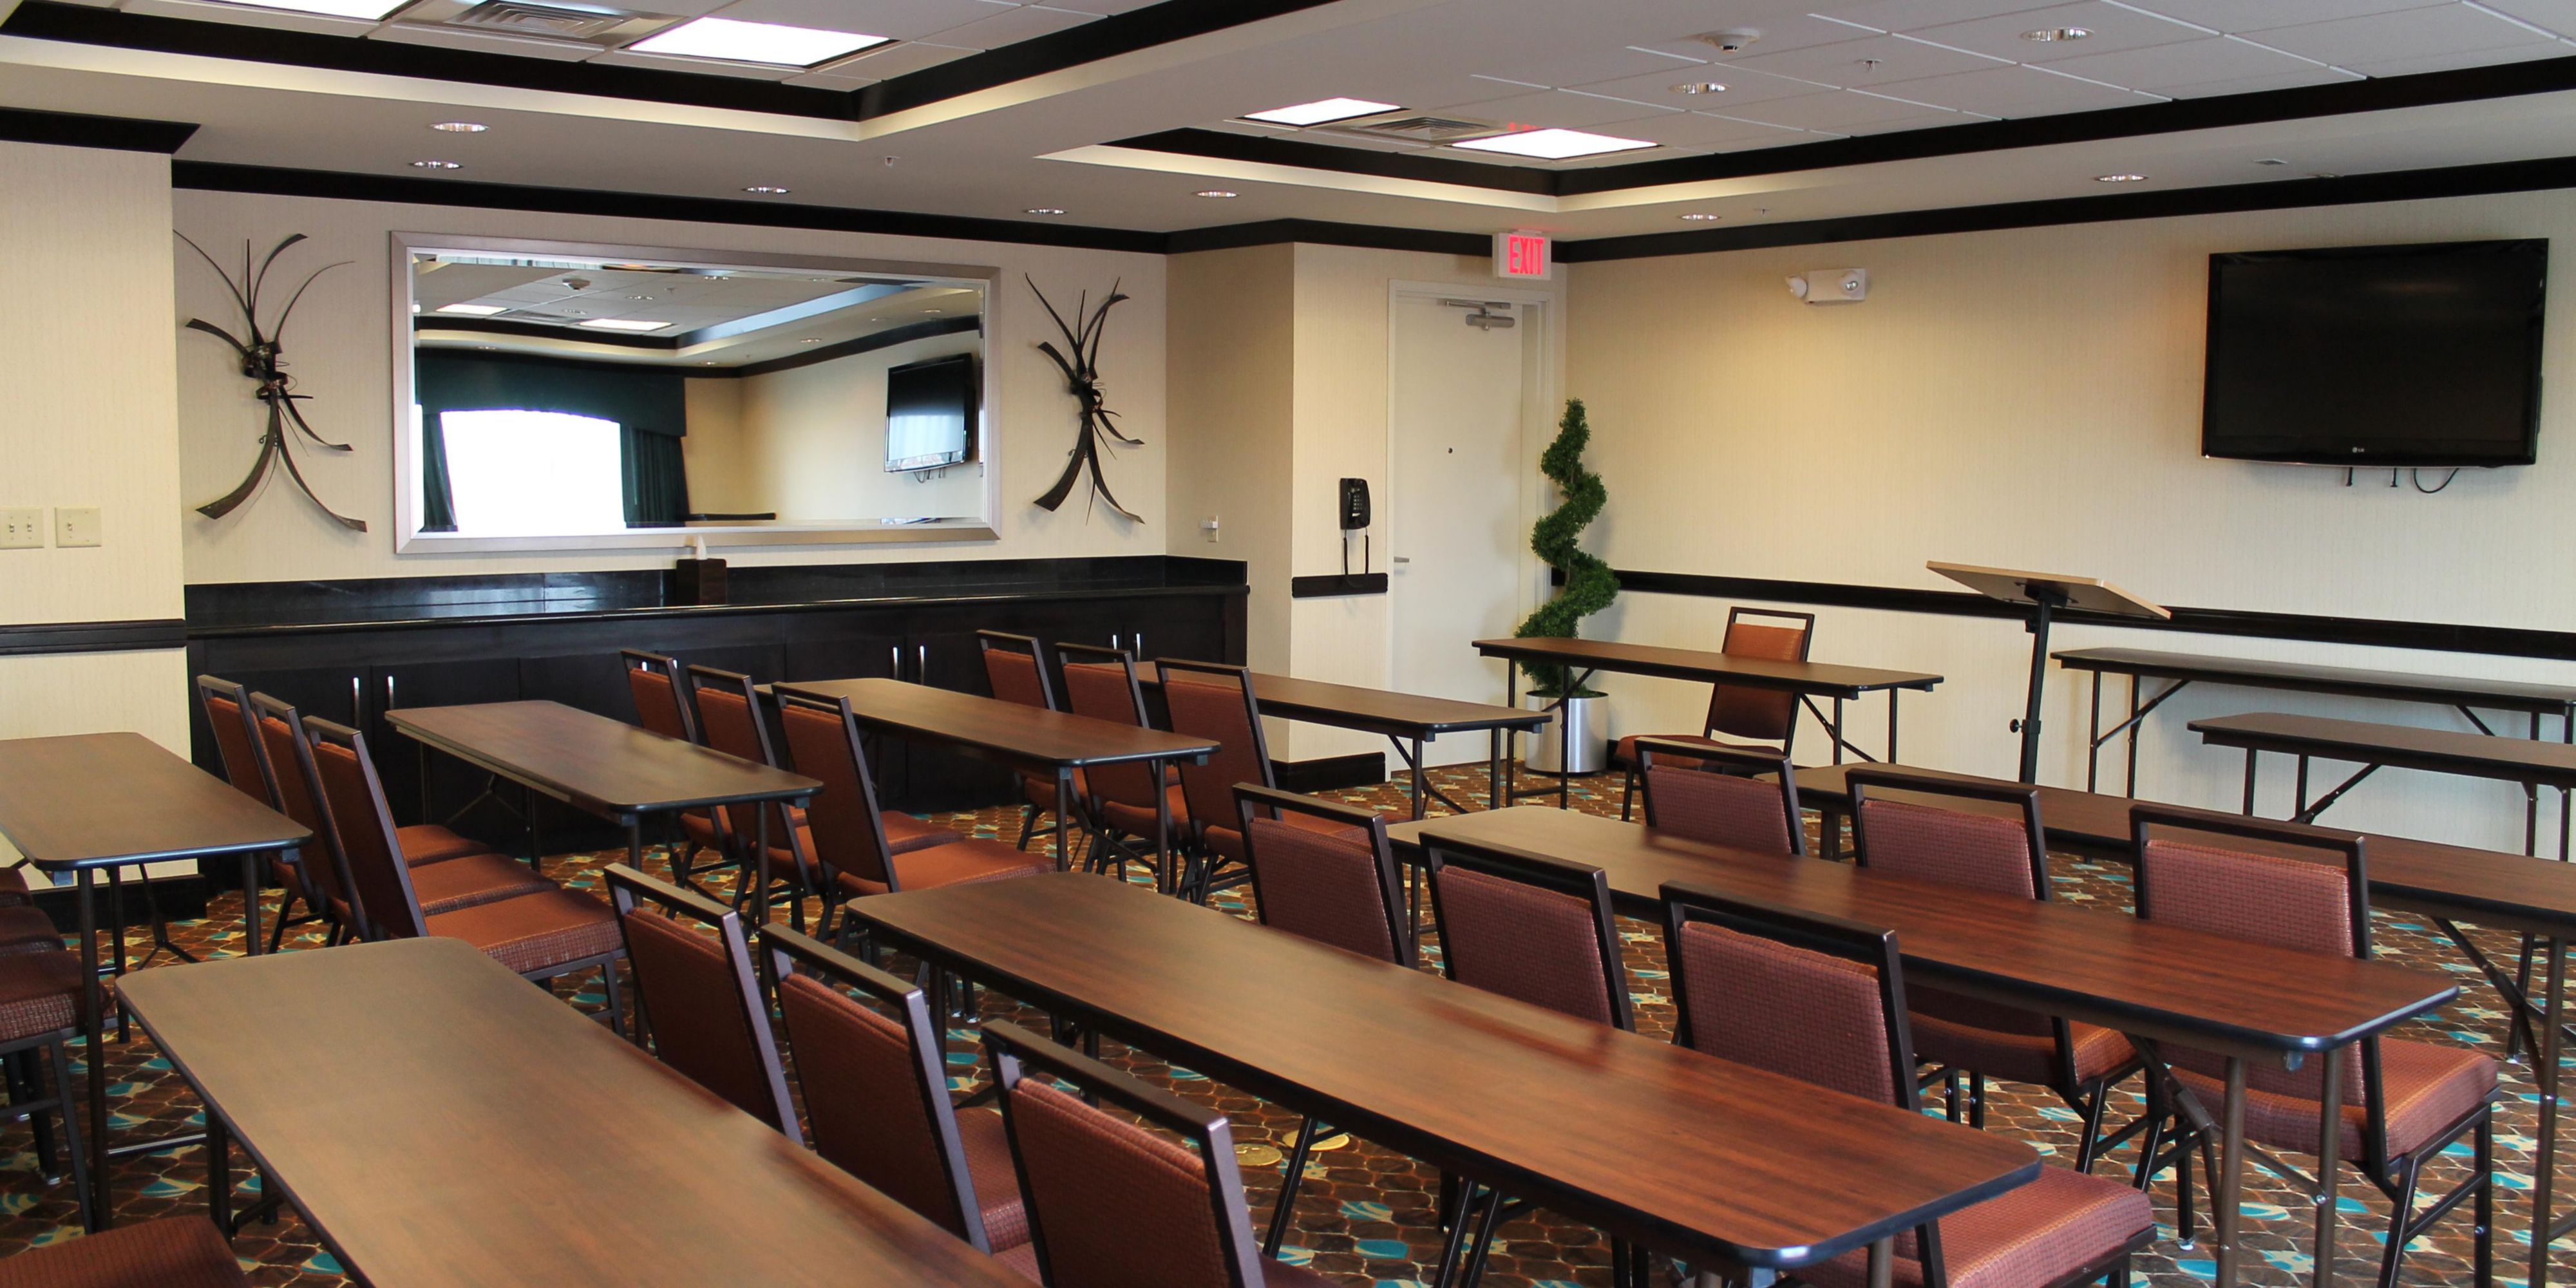 The Holiday Inn Express and Suites Alpine Southeast's meeting room is perfect for your needs. The space holds up to 30 people and can be used for business meetings, conferences, family events, and celebrations.